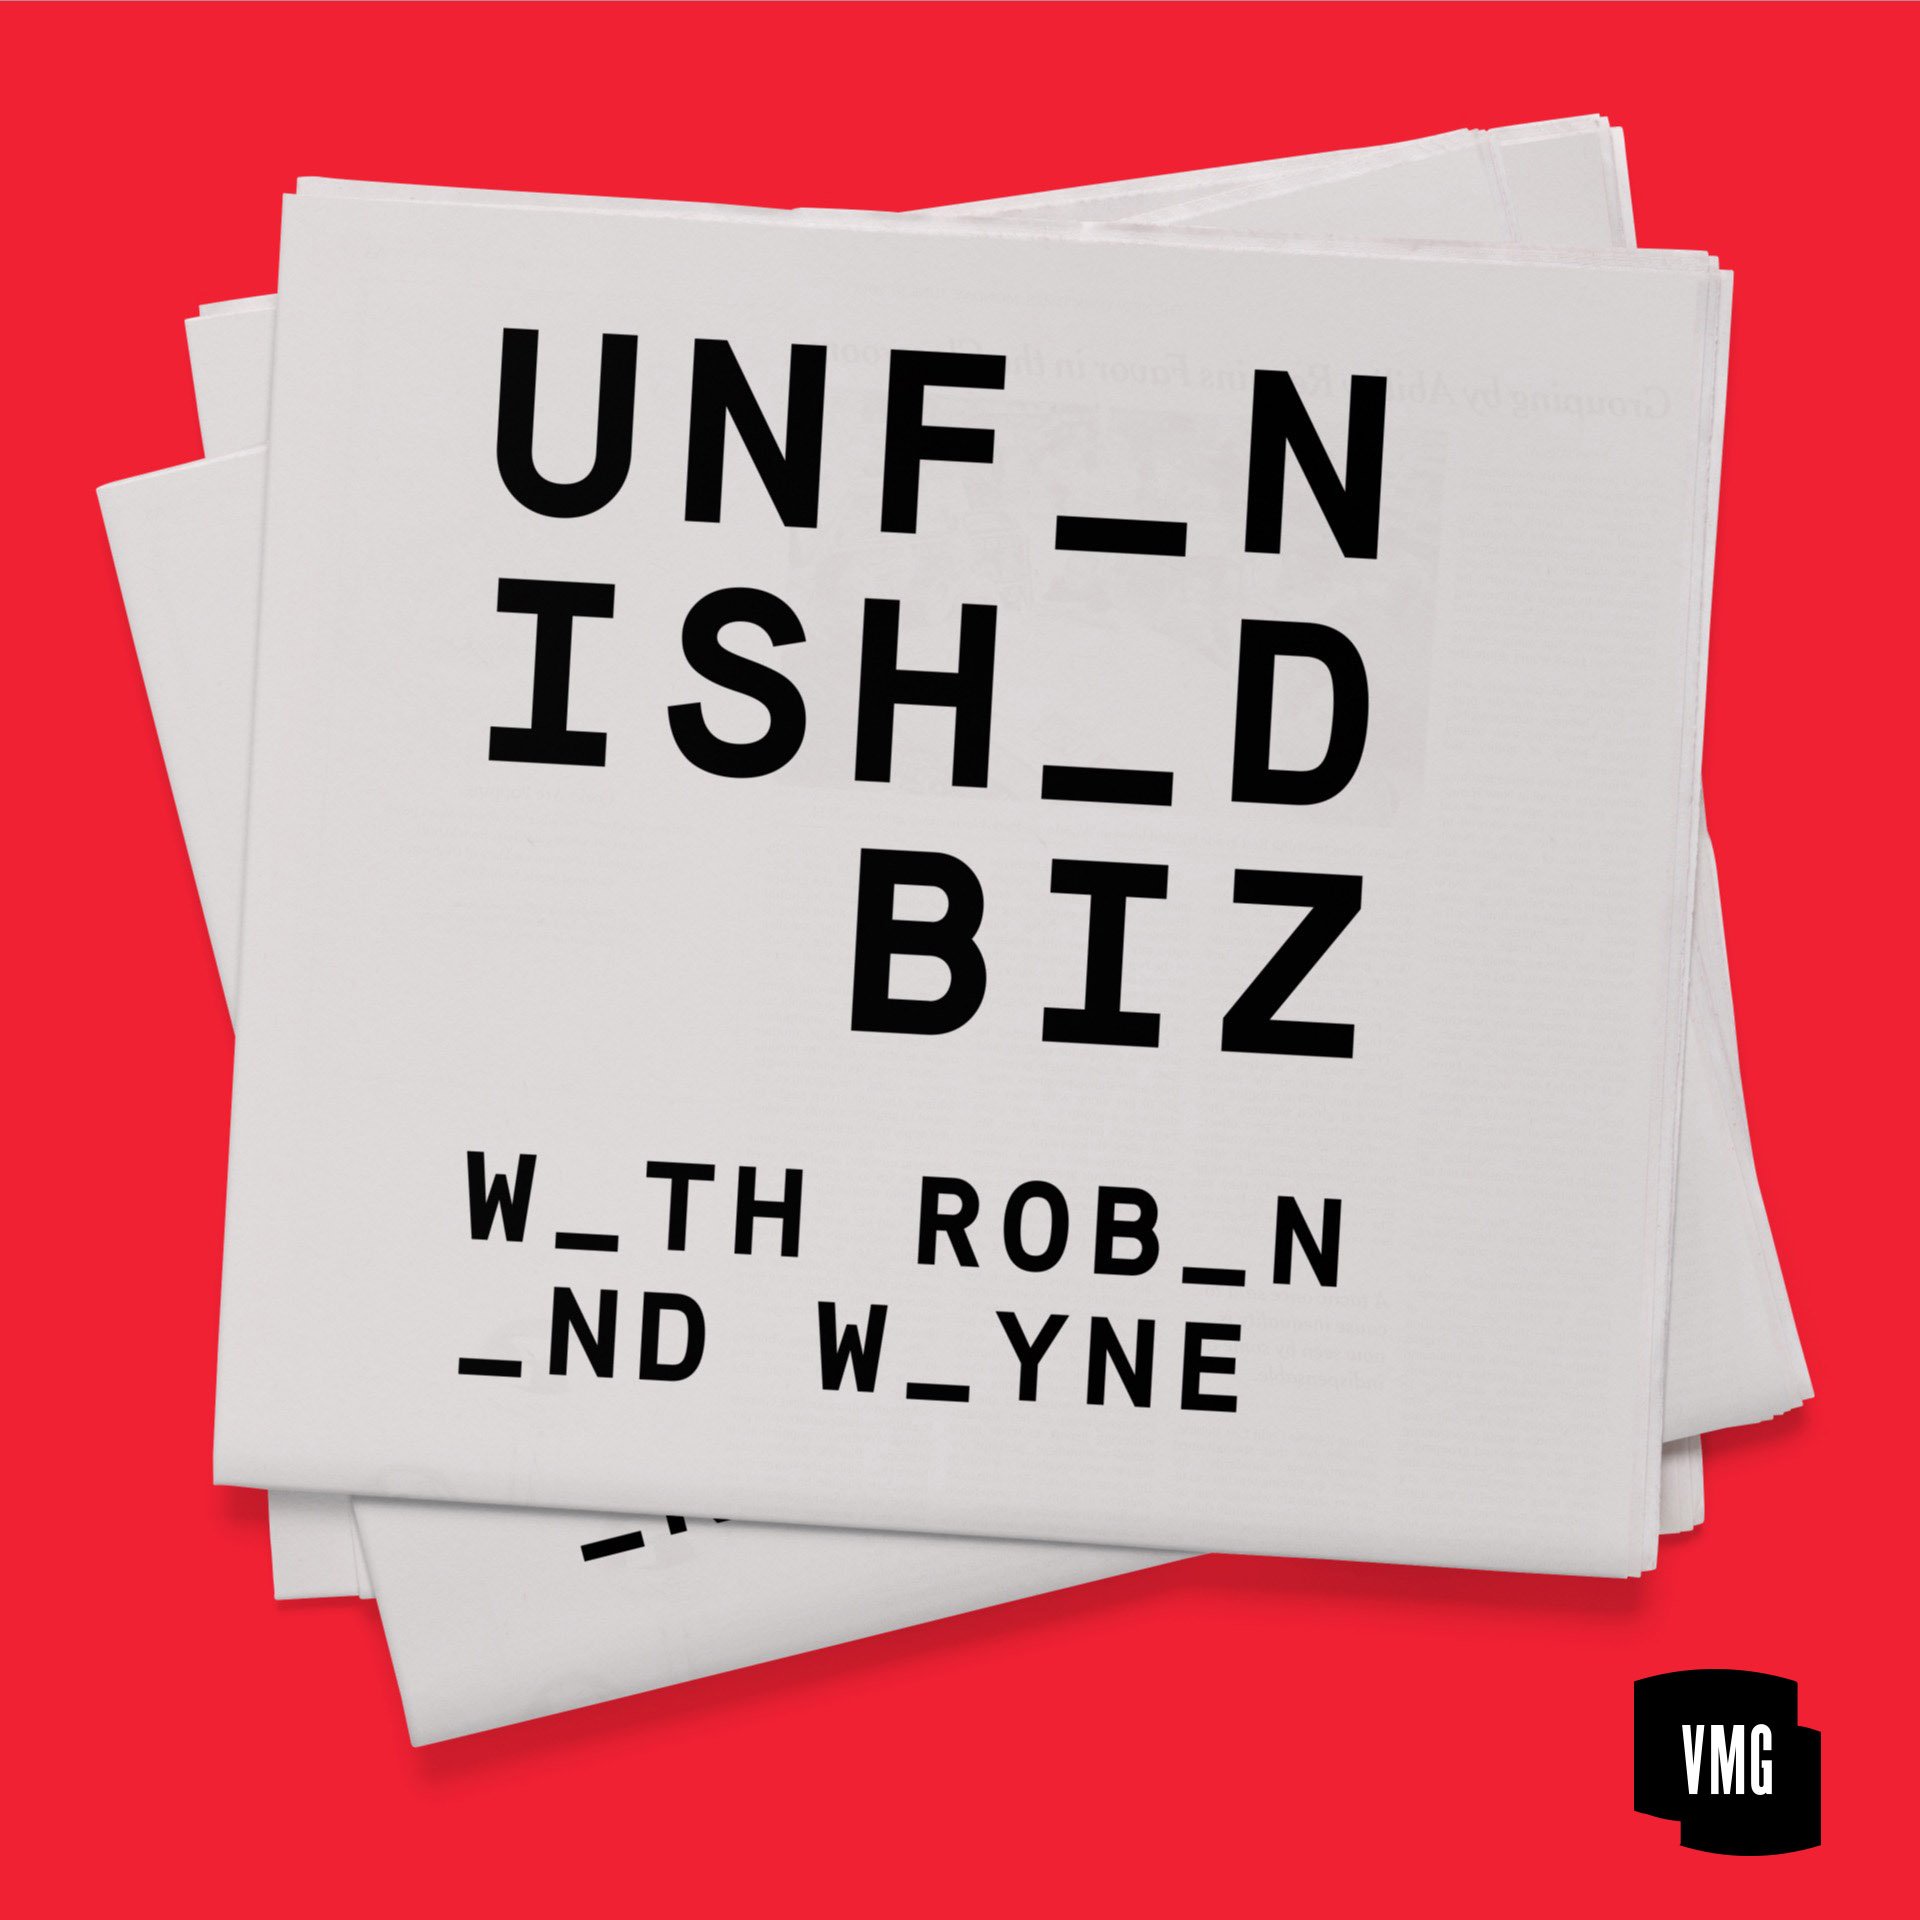 Unfinished Biz is a podcast from VMG Partners, focusing on the highs, lows, and challenges of being a Founder and building an emerging brand in today's world.